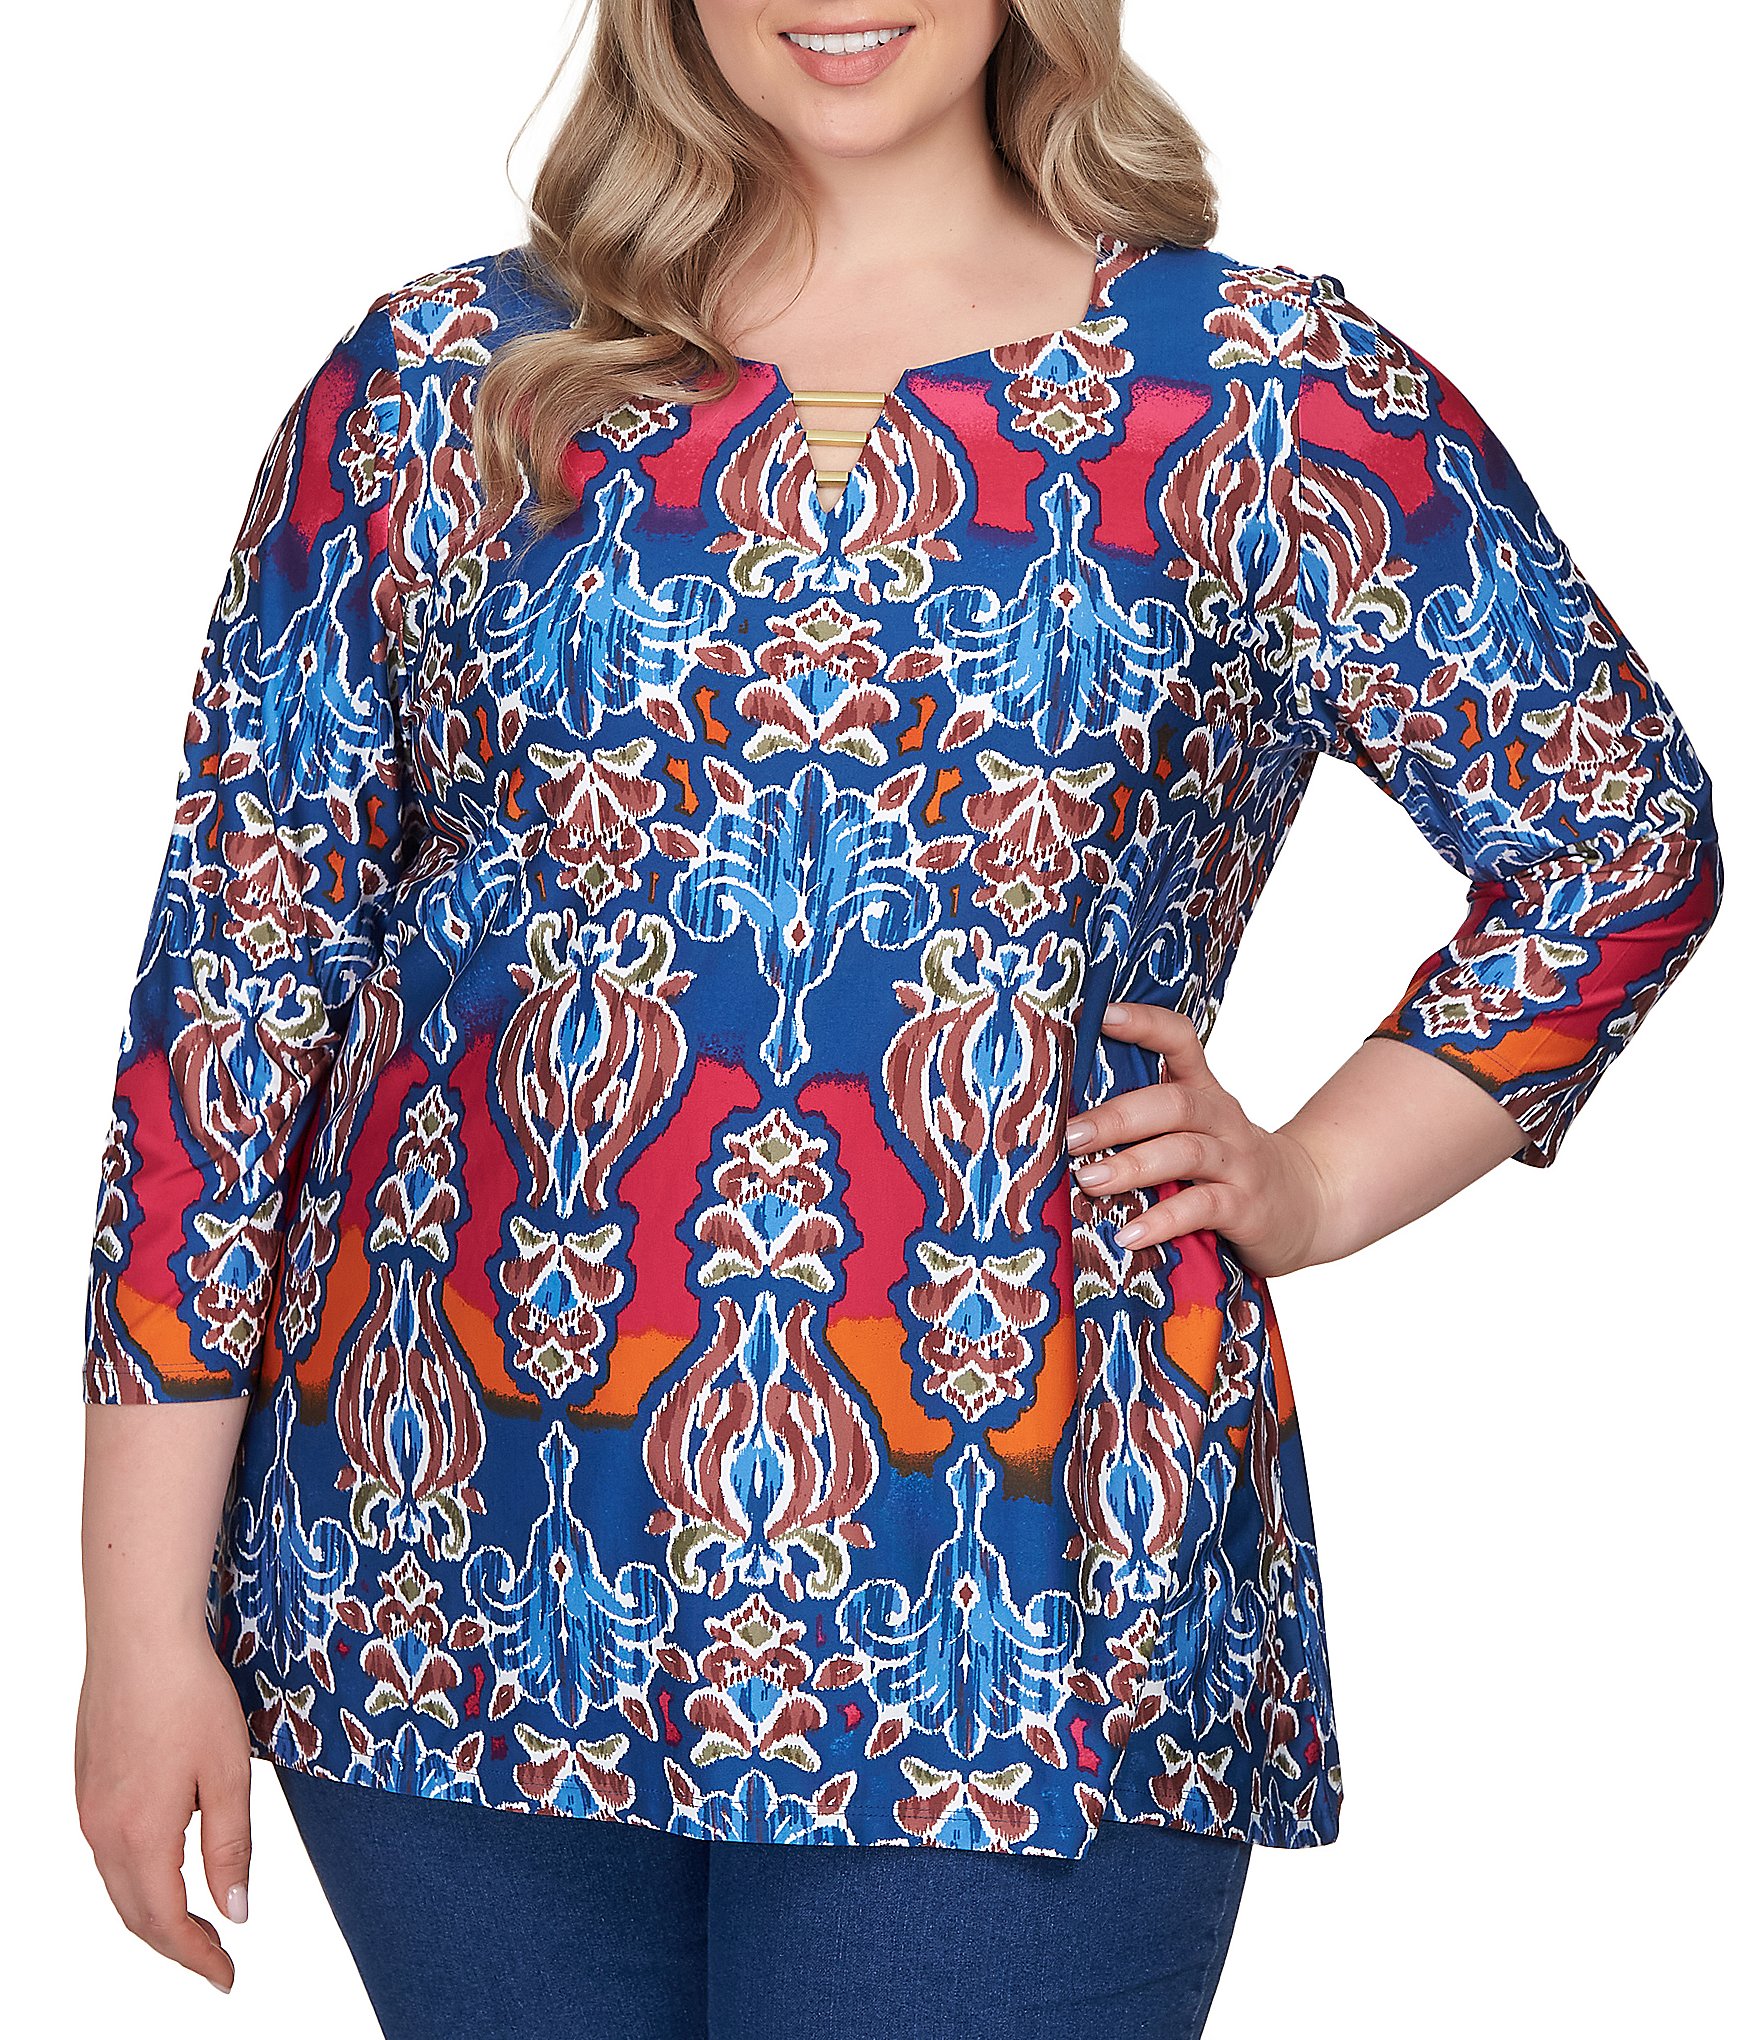 Ruby Rd. Plus Size Floral Print Knit Embellished 3/4 Sleeve Horseshoe Neck  Top